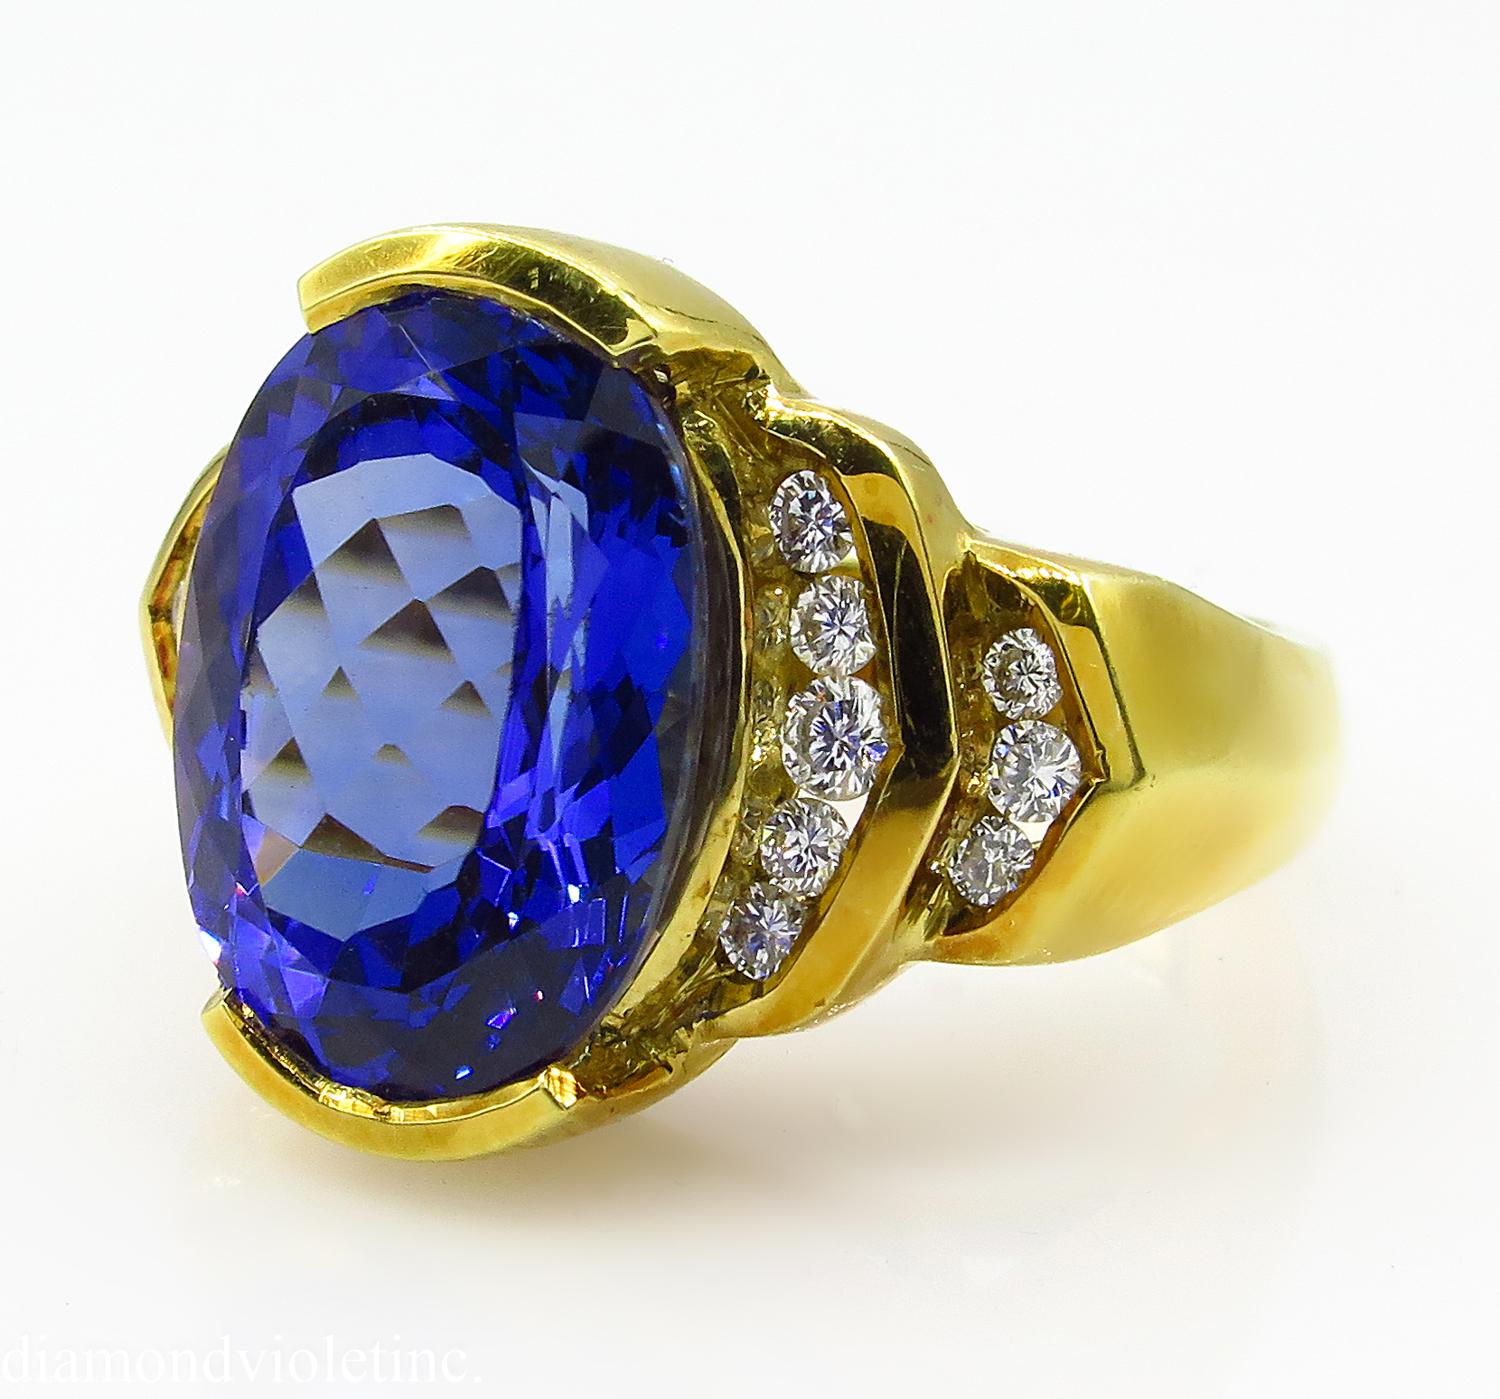 This breathtakingly beautiful Vintage NATURAL Tanzanite and Diamond Engagement Anniversary Ring crafted in rich 18K Yellow Gold (stamped) dazzles Beautiful GIA Certified NATURAL Oval Shape Tanzanite in Deep Blue-Violet color; approx. estimated as